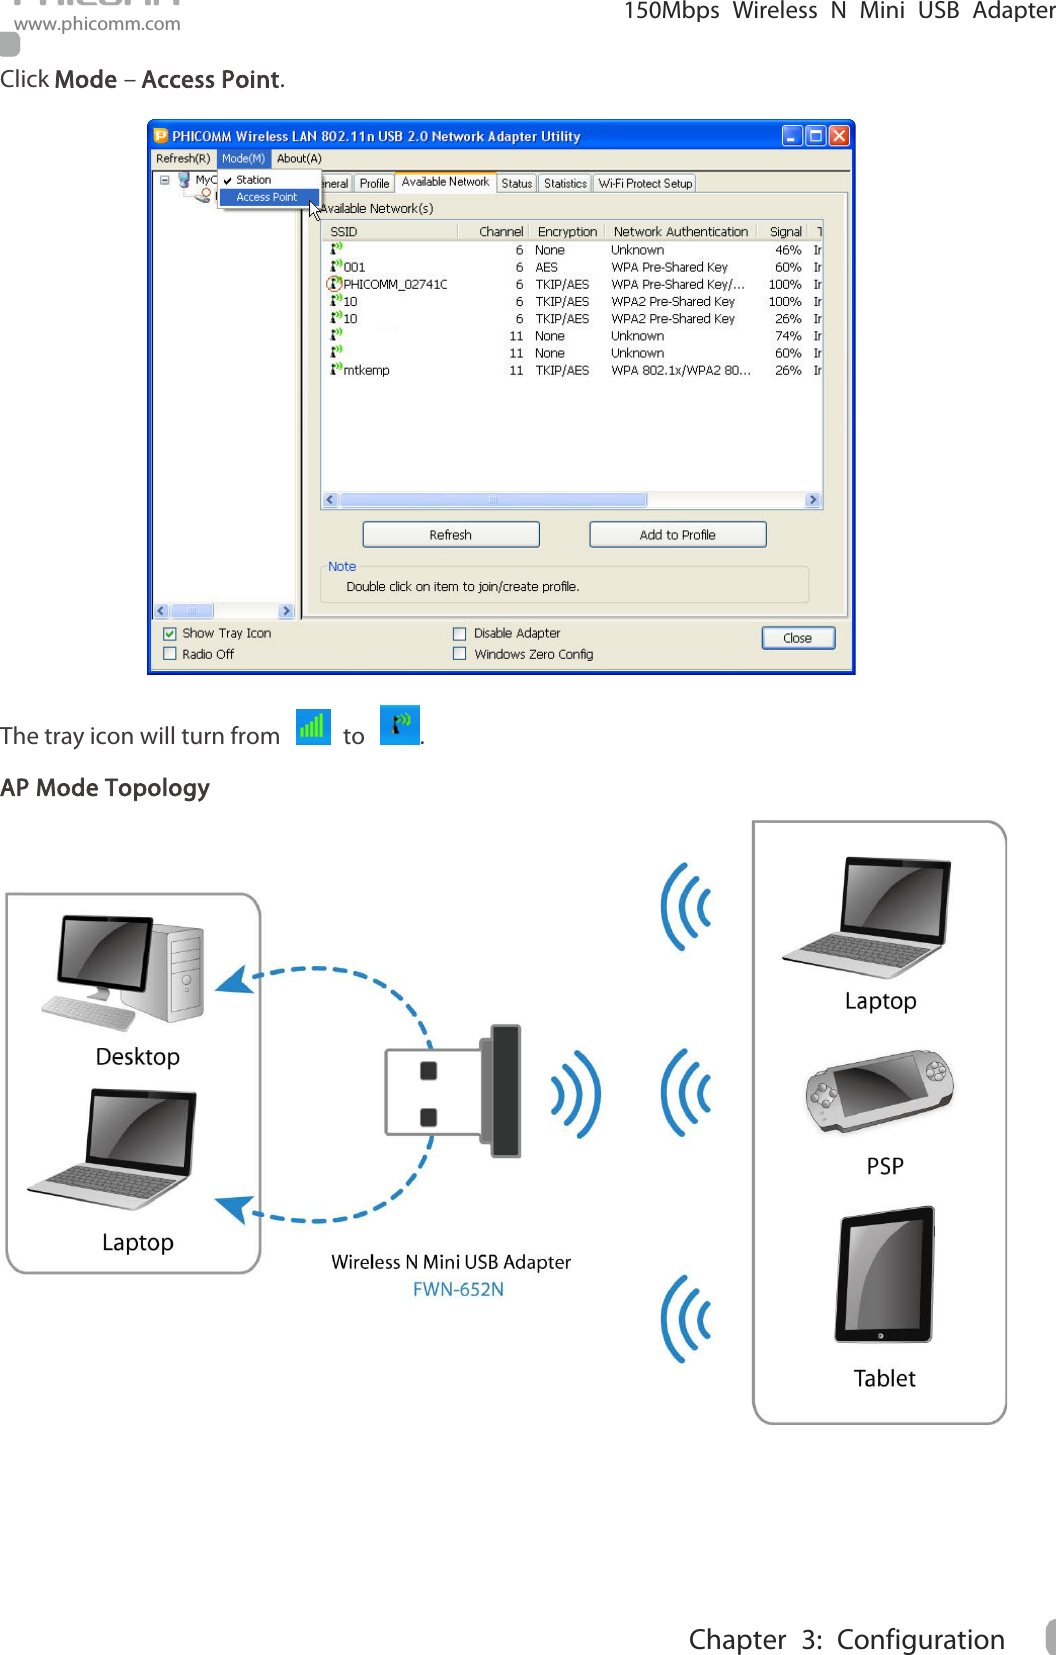                                                            150Mbps Wireless N Mini  USB Adapter www.phicomm.com 11 Chapter  3: Configuration  Click Mode – Access Point.  The tray icon will turn from    to  . AP Mode Topology       